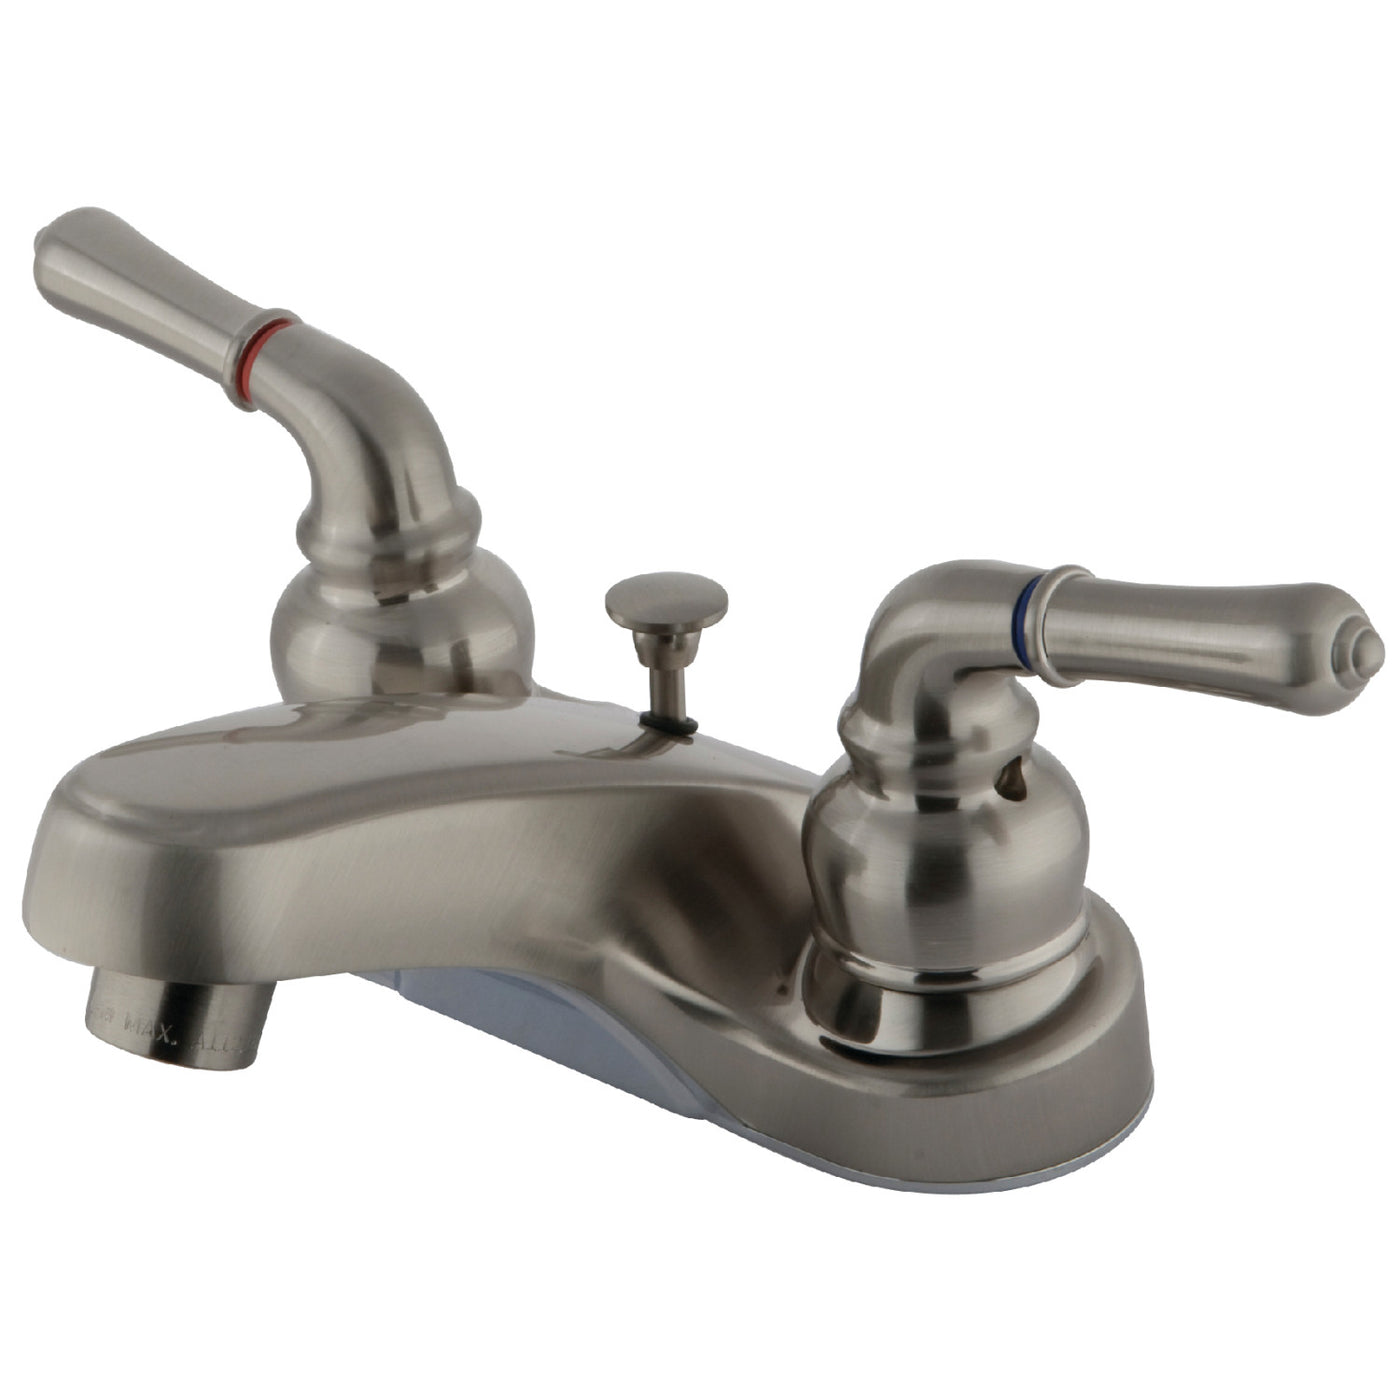 Elements of Design EB258B 4-Inch Centerset Bathroom Faucet, Brushed Nickel